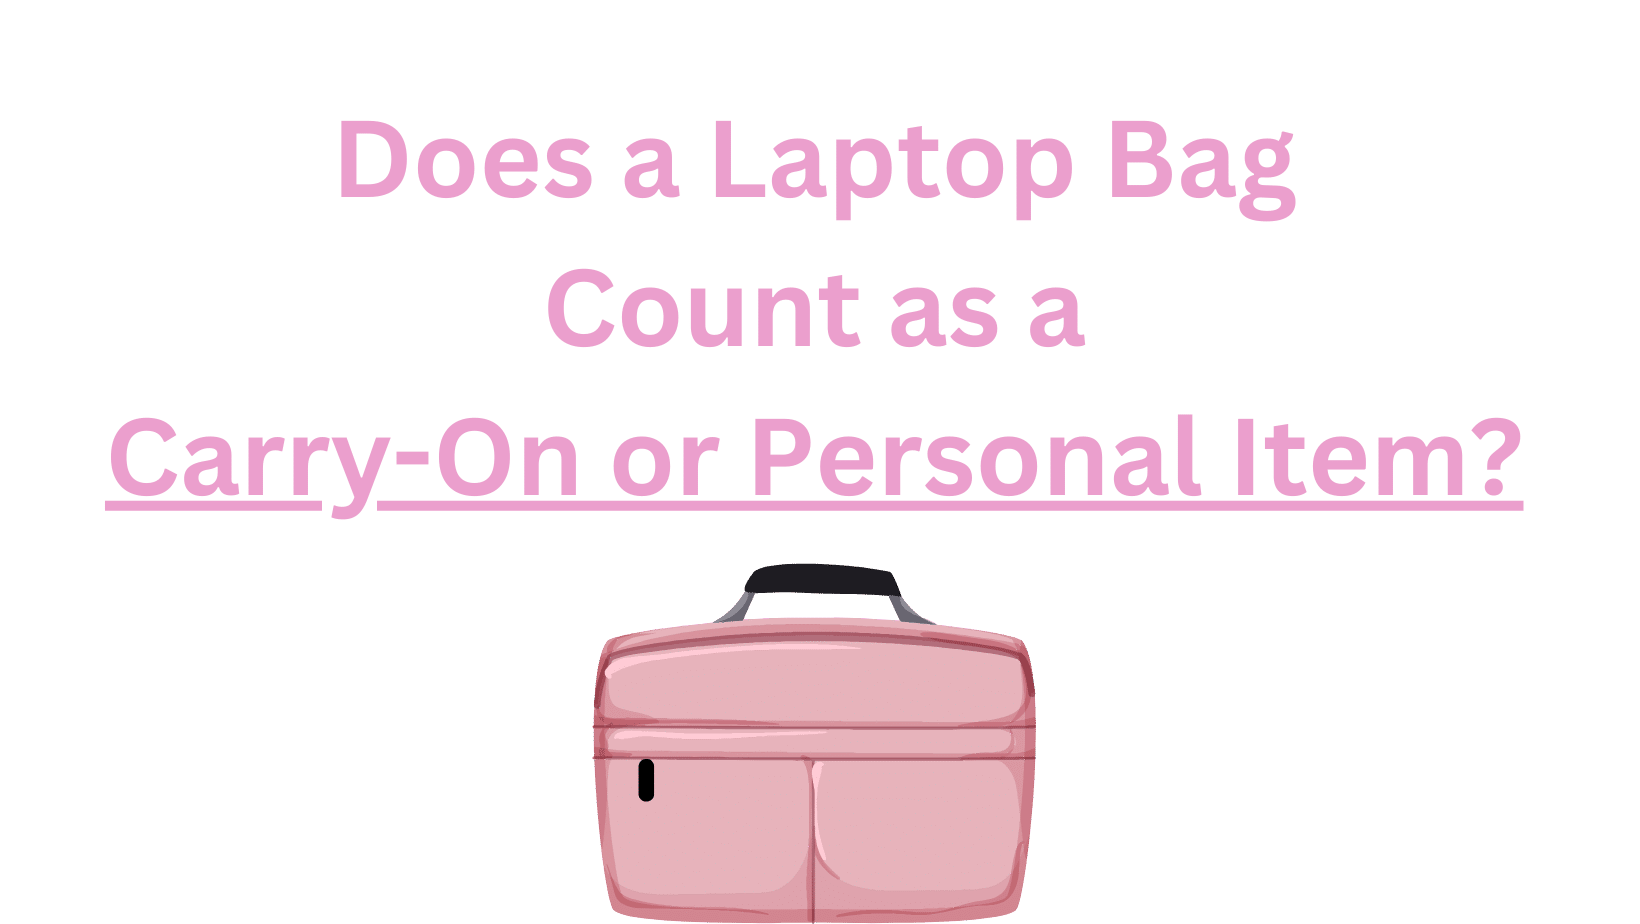 Does a laptop bag count as a carry-on or personal item?